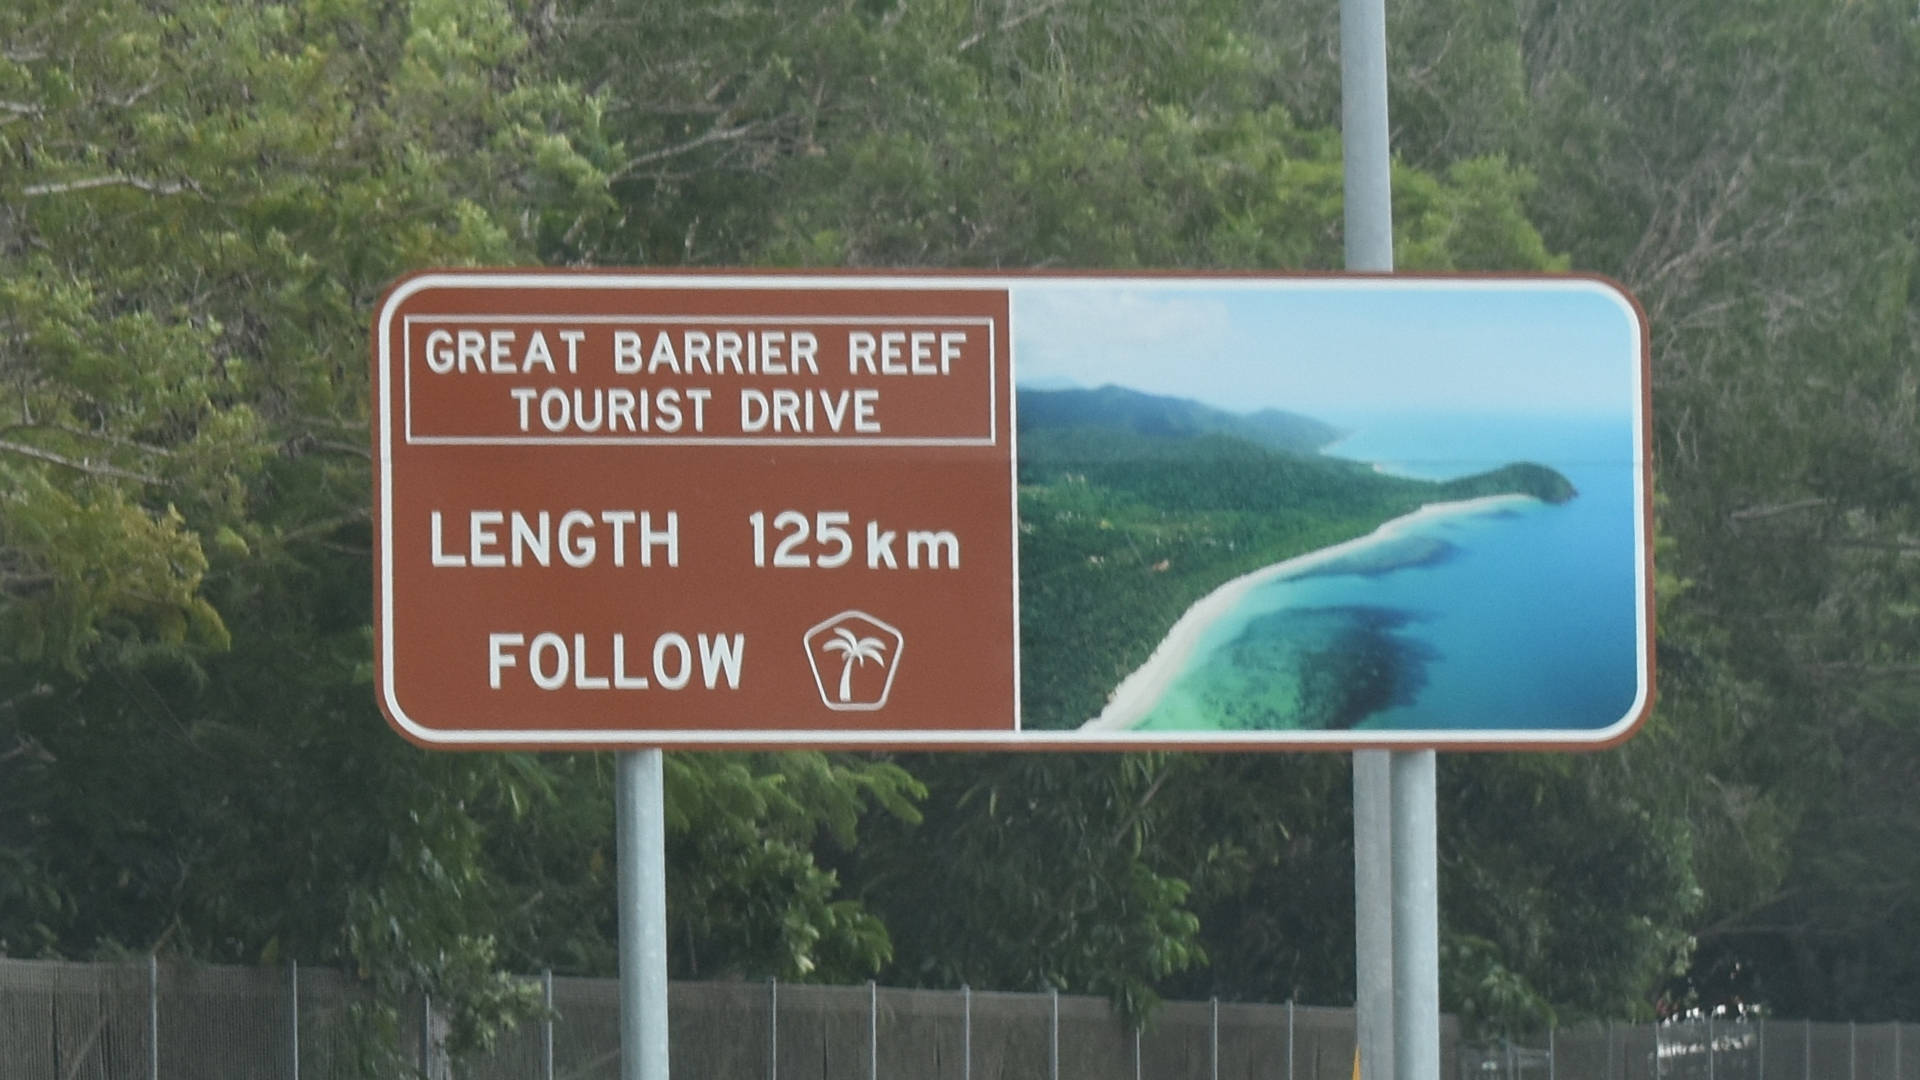 Brown sign for Great Barrier Reef Tourist Drive, length 125km, follow palm tree symbol